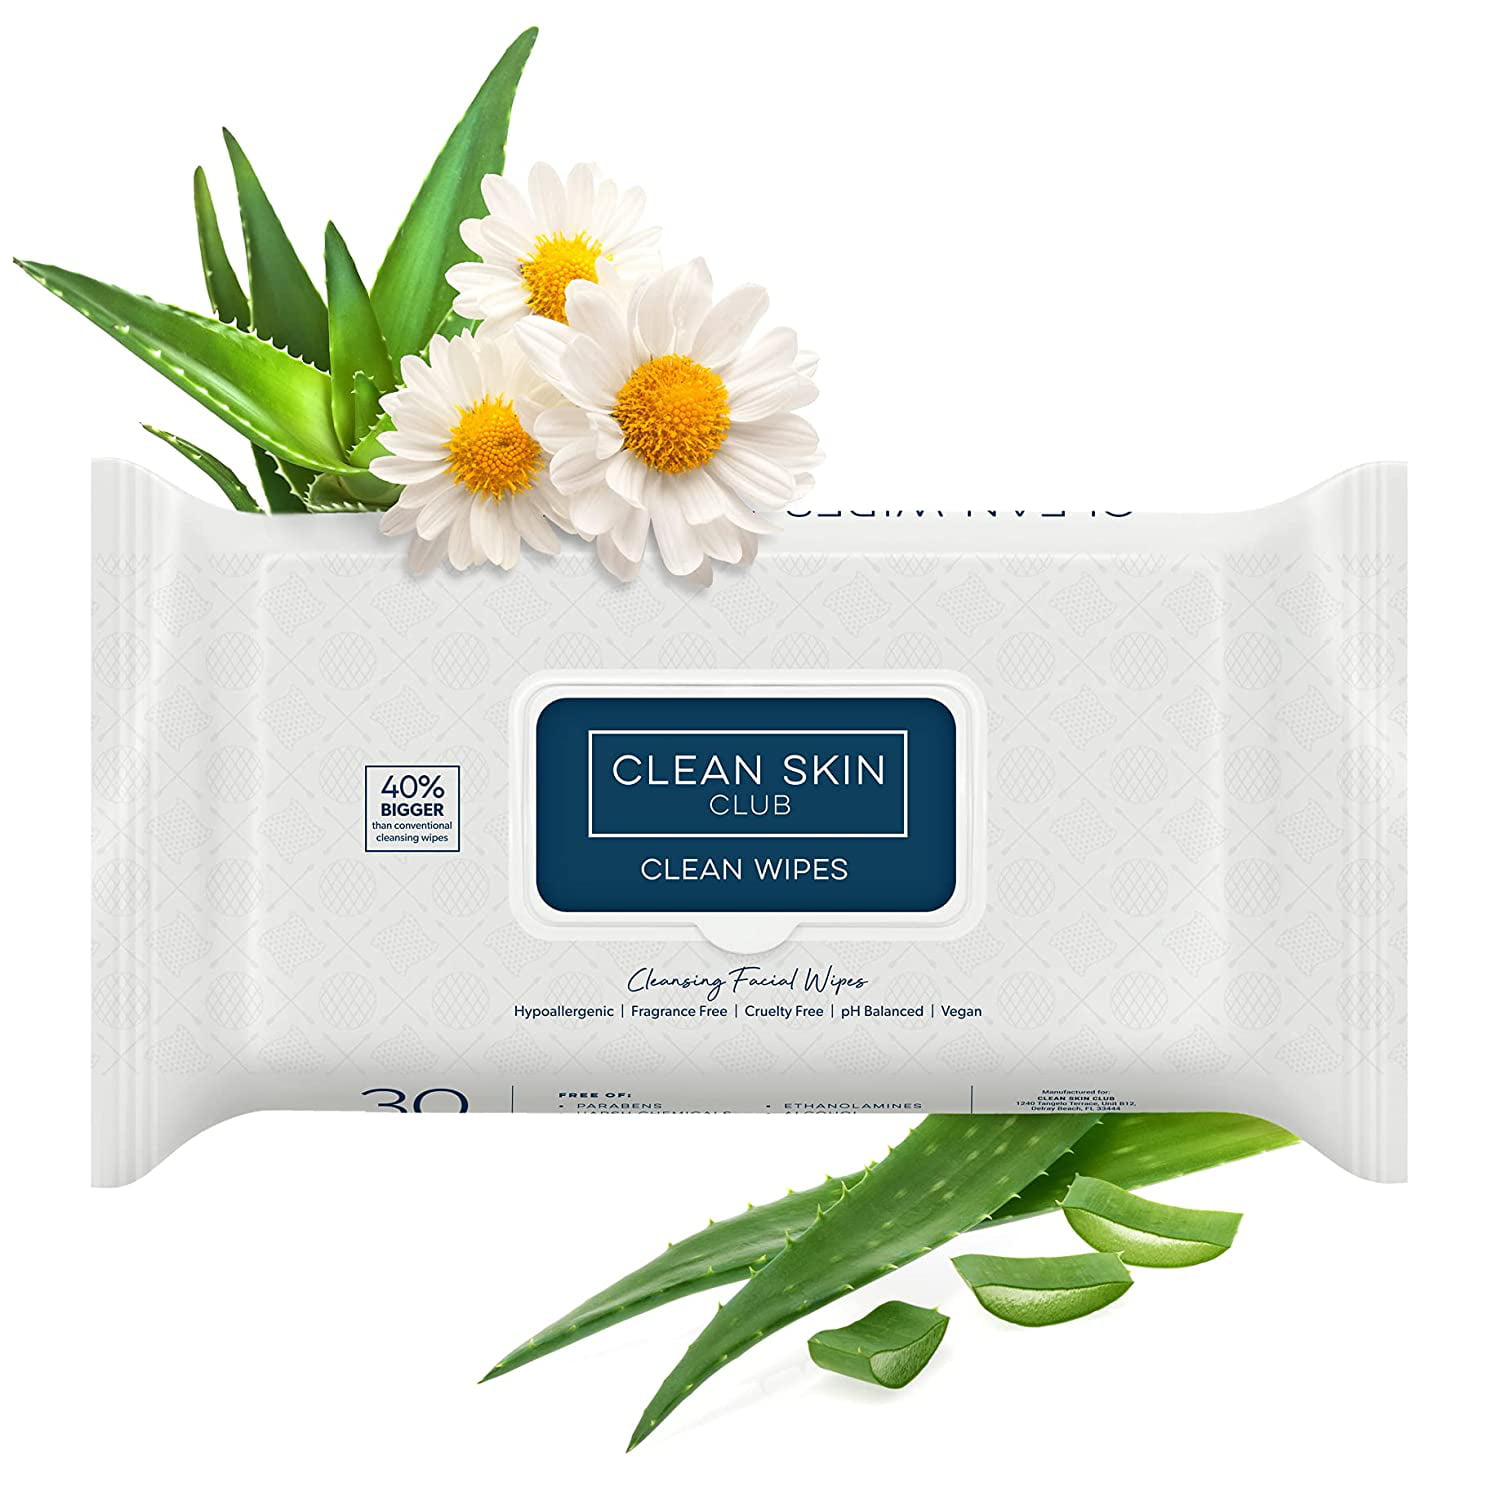 Clean Skin Club Premium Face Wipes Makeup Removing Towelettes, 30